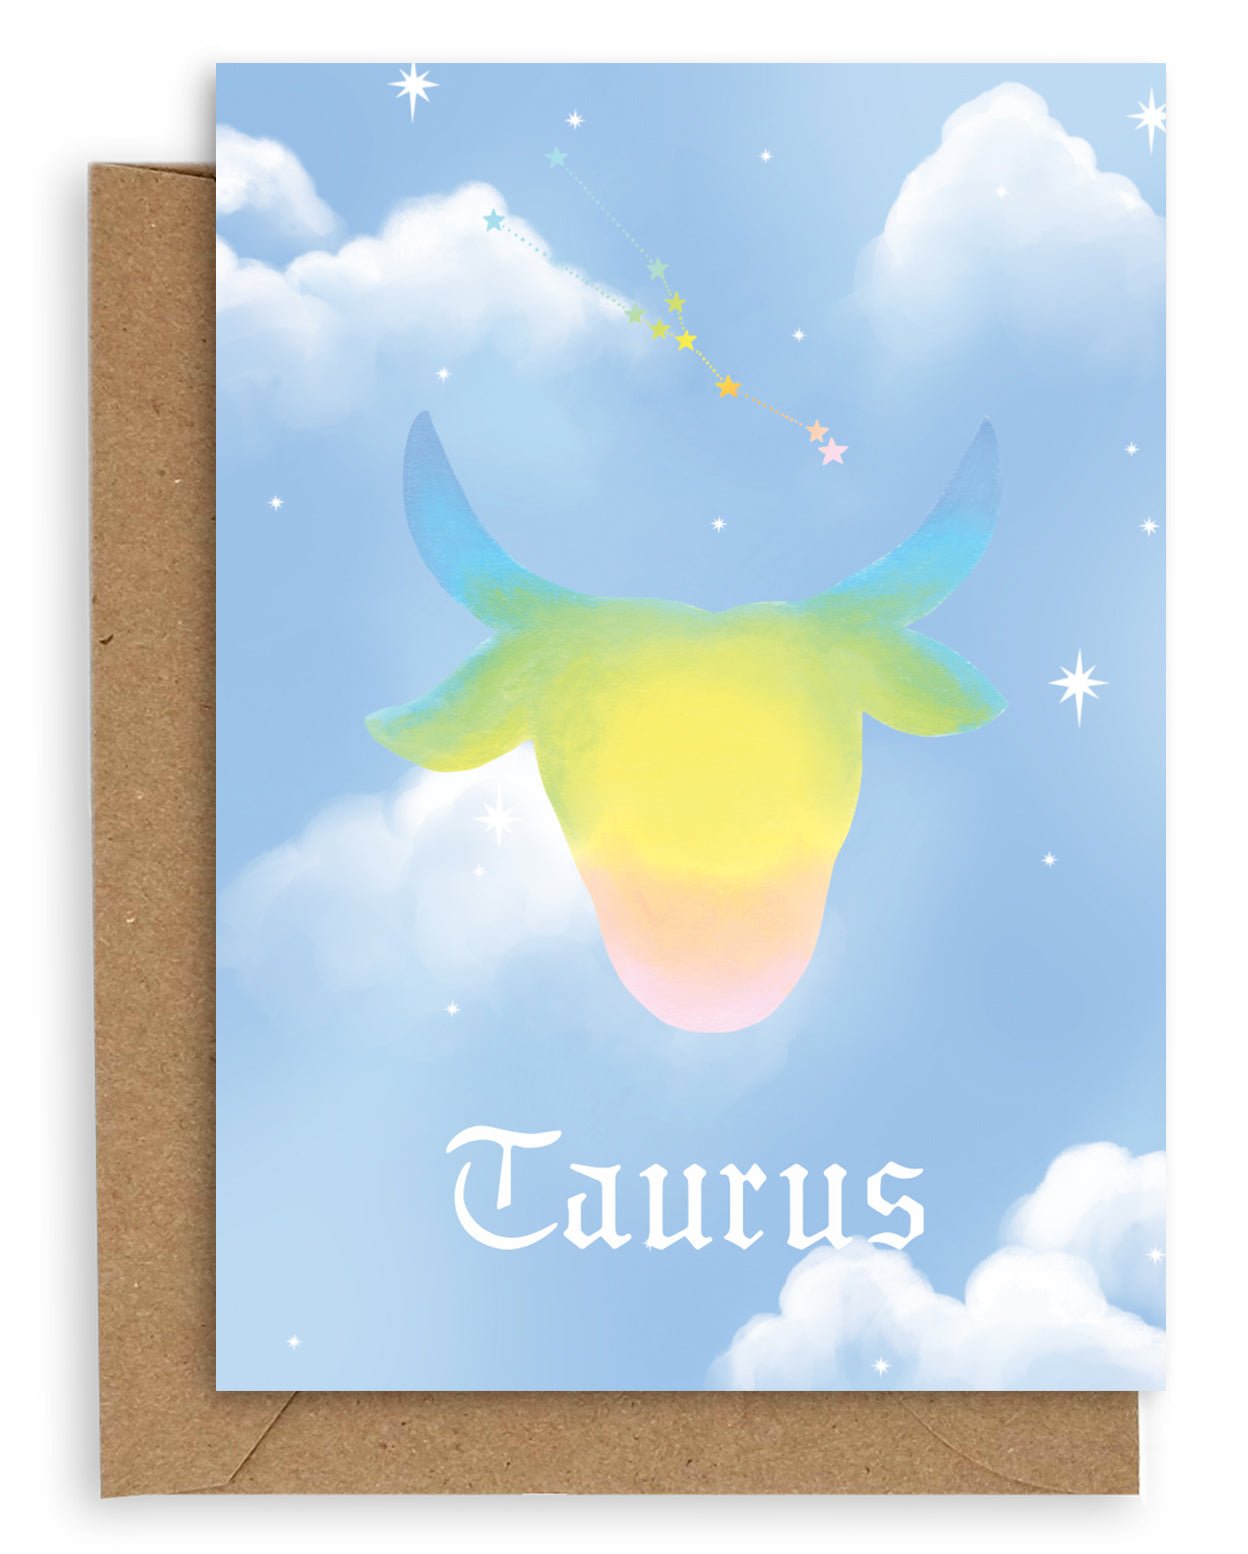 Taurus  Horoscope card with a kraft envelope. The horoscope symbol is painted in rainbow pastel on a blue background with white clouds. 